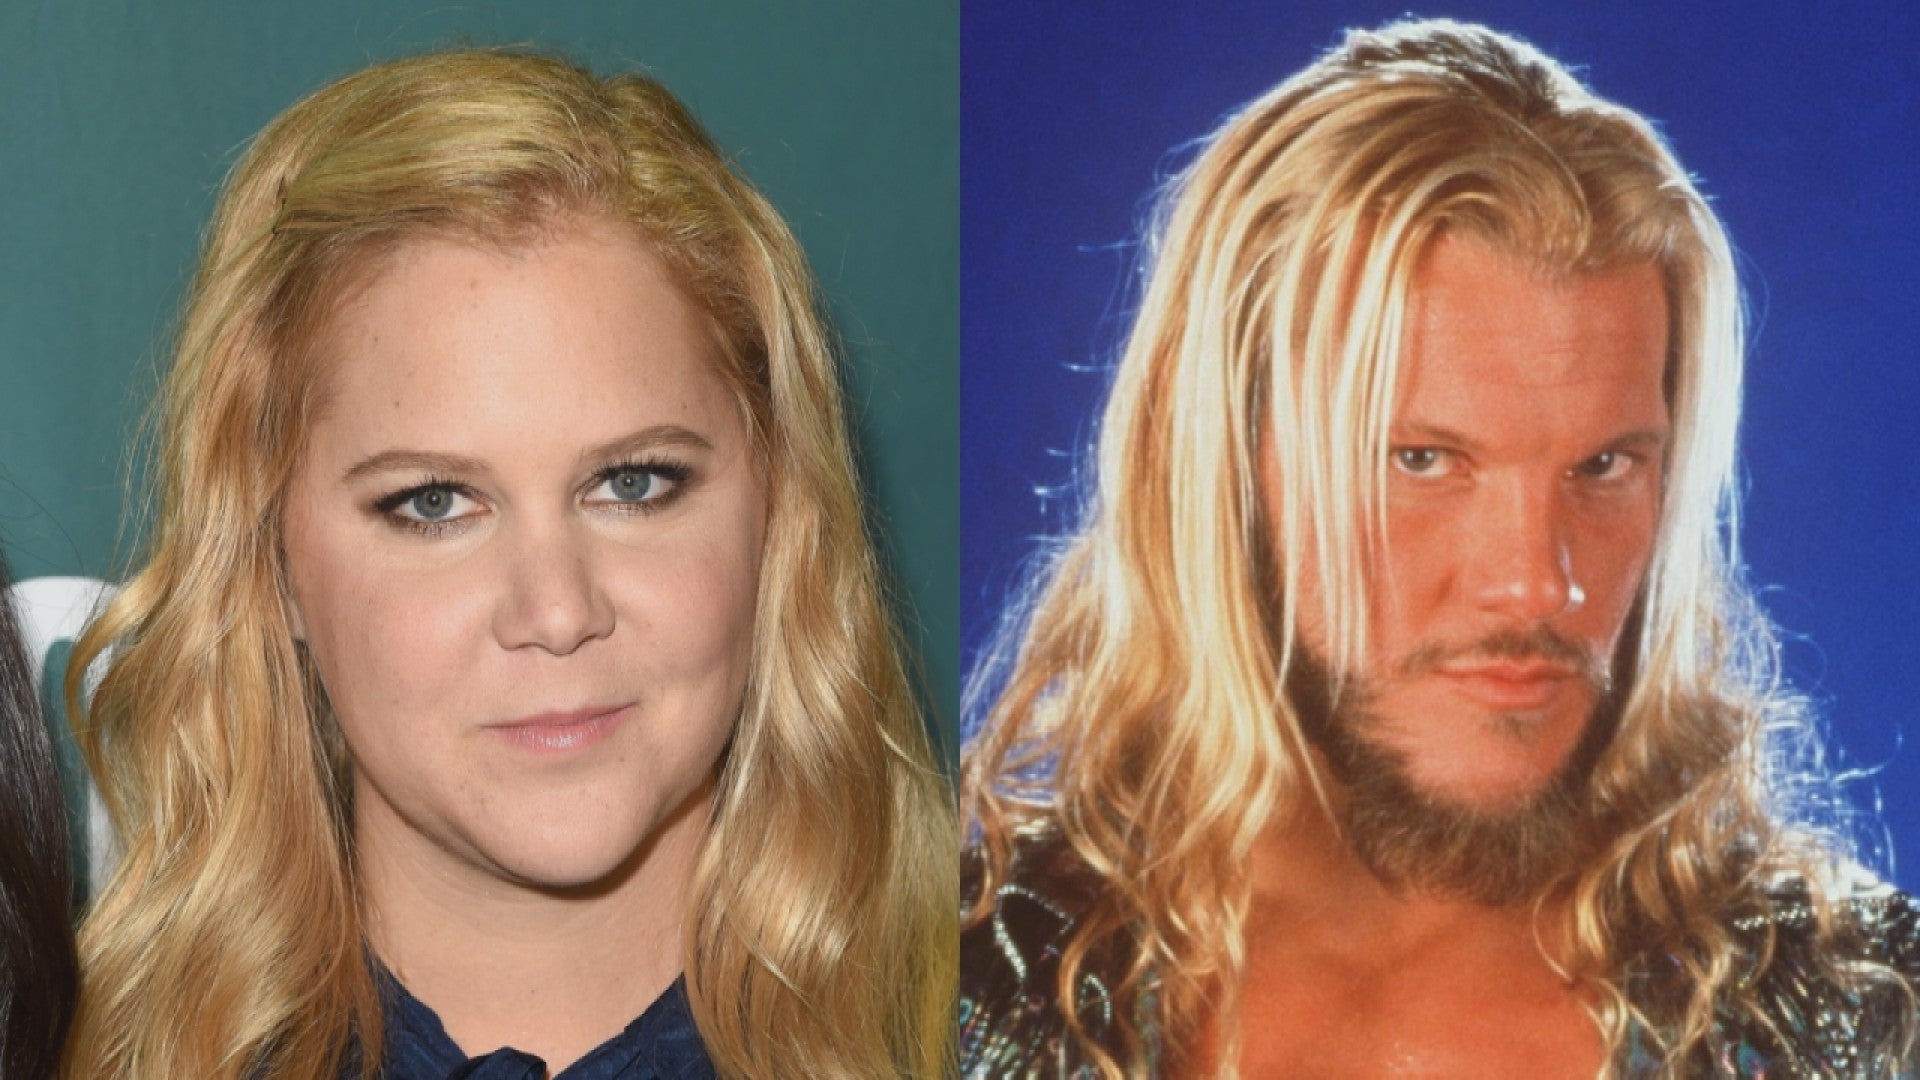 Amy Schumer Shares Hilarious Meme Comparing Herself to Professional  Wrestler Chris Jericho: '#Flattered' | Entertainment Tonight